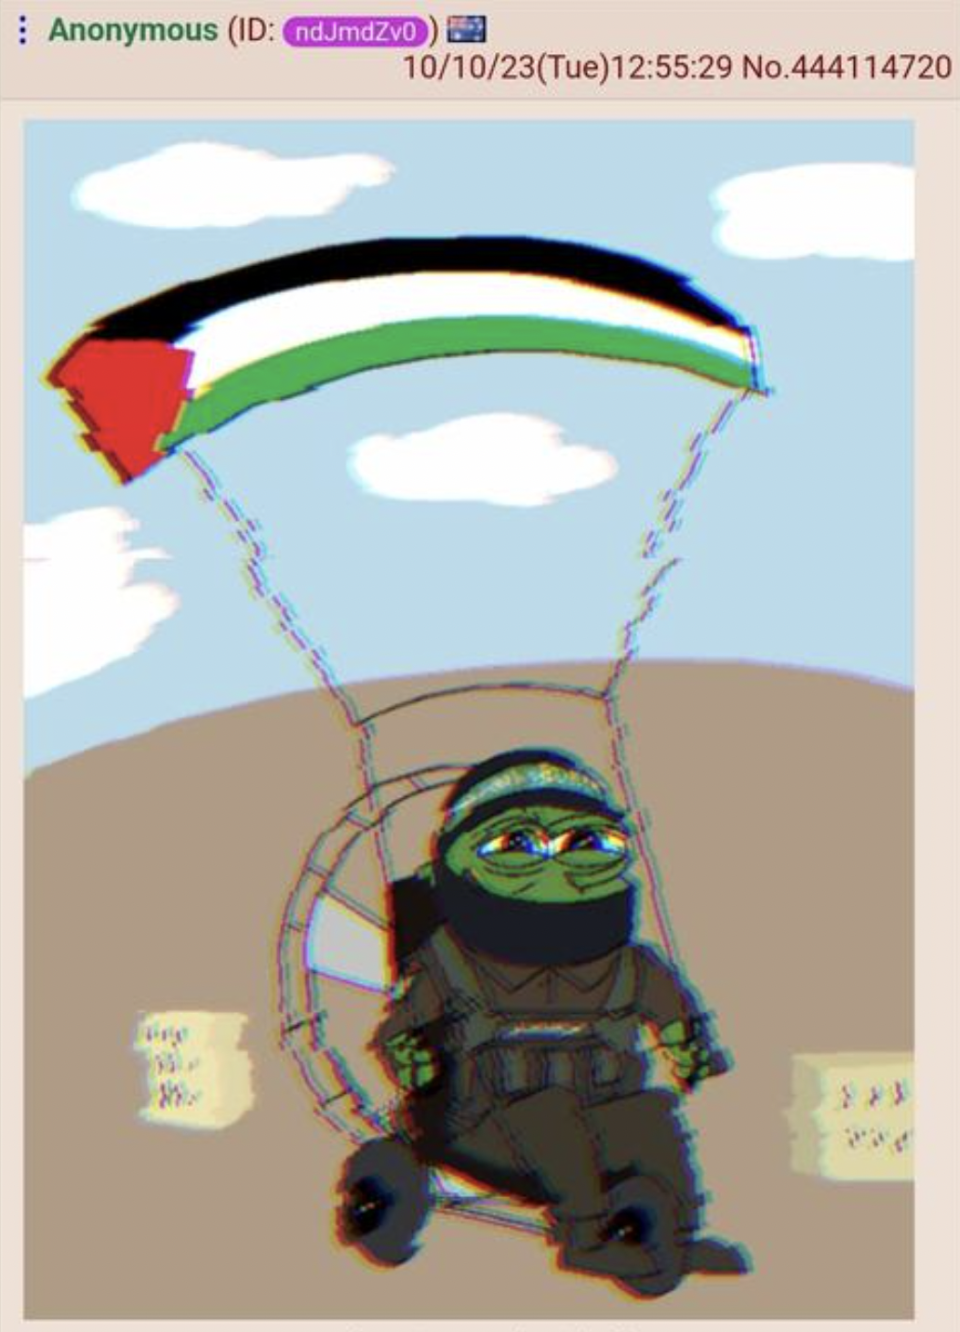 This image, posted in a 4chan forum, incorporates Pepe the Frog, a character coopted by the alt right.